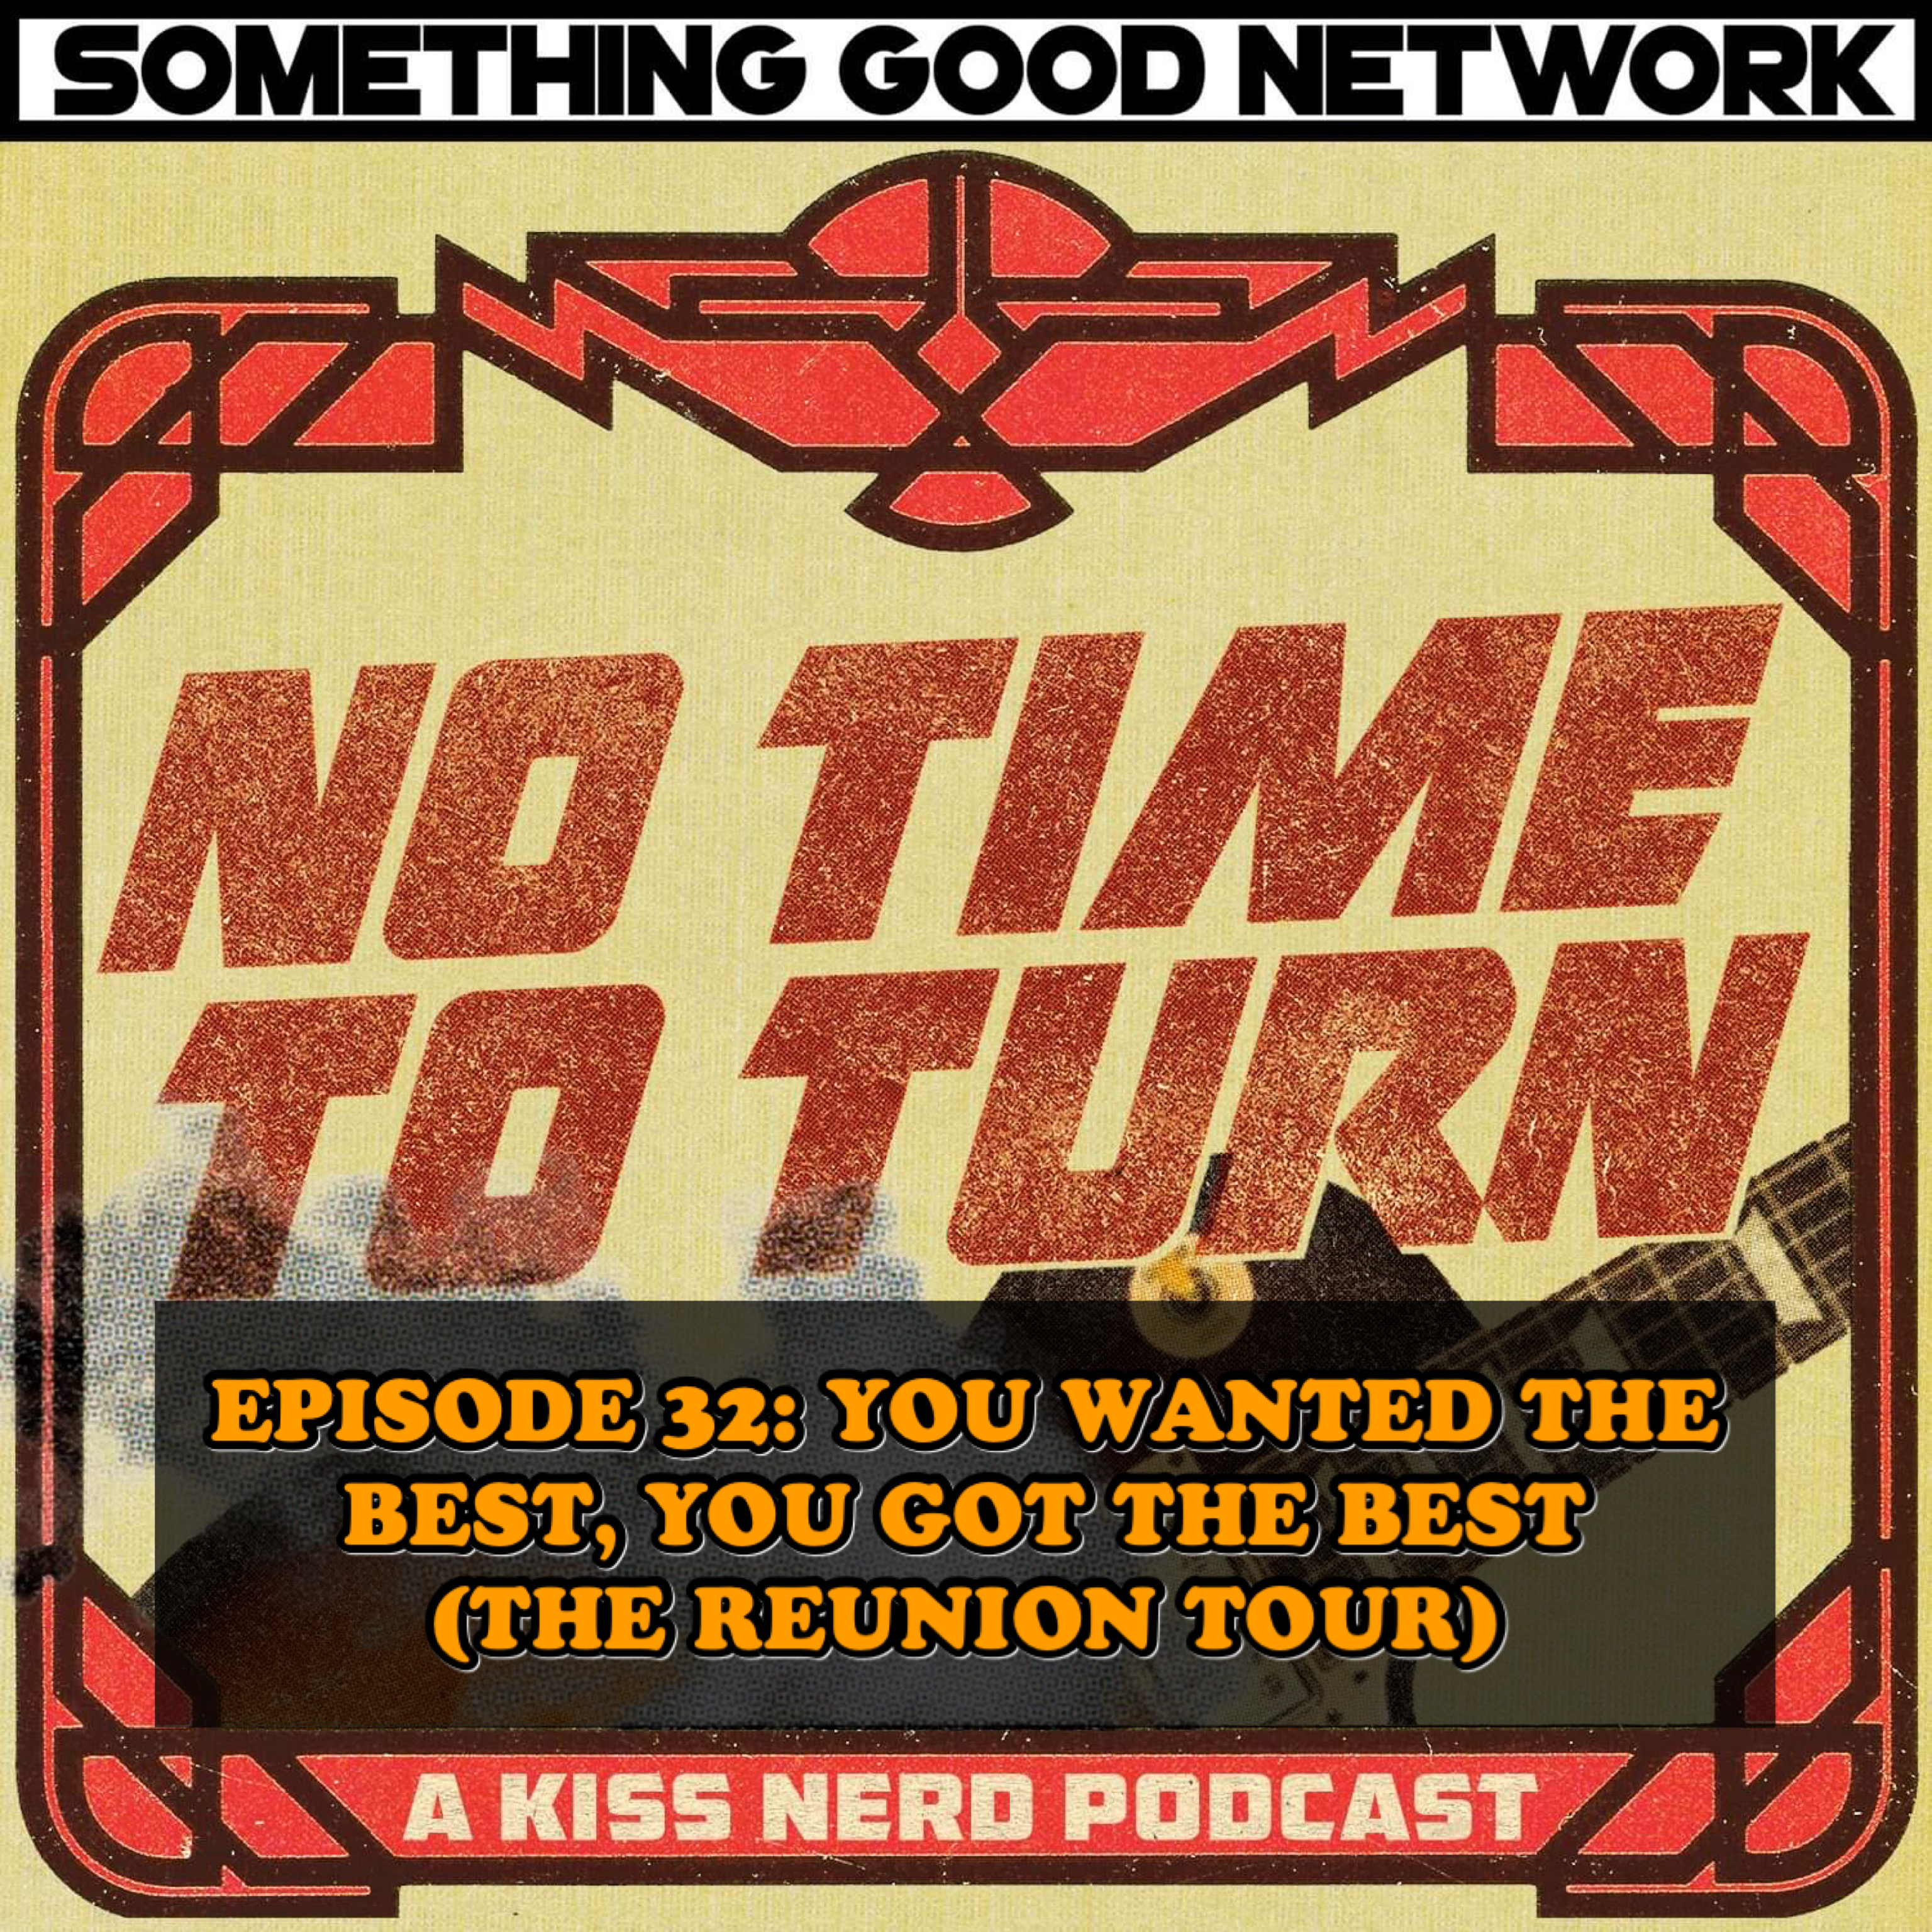 Episode 32 - You Wanted The Best, You Got The Best